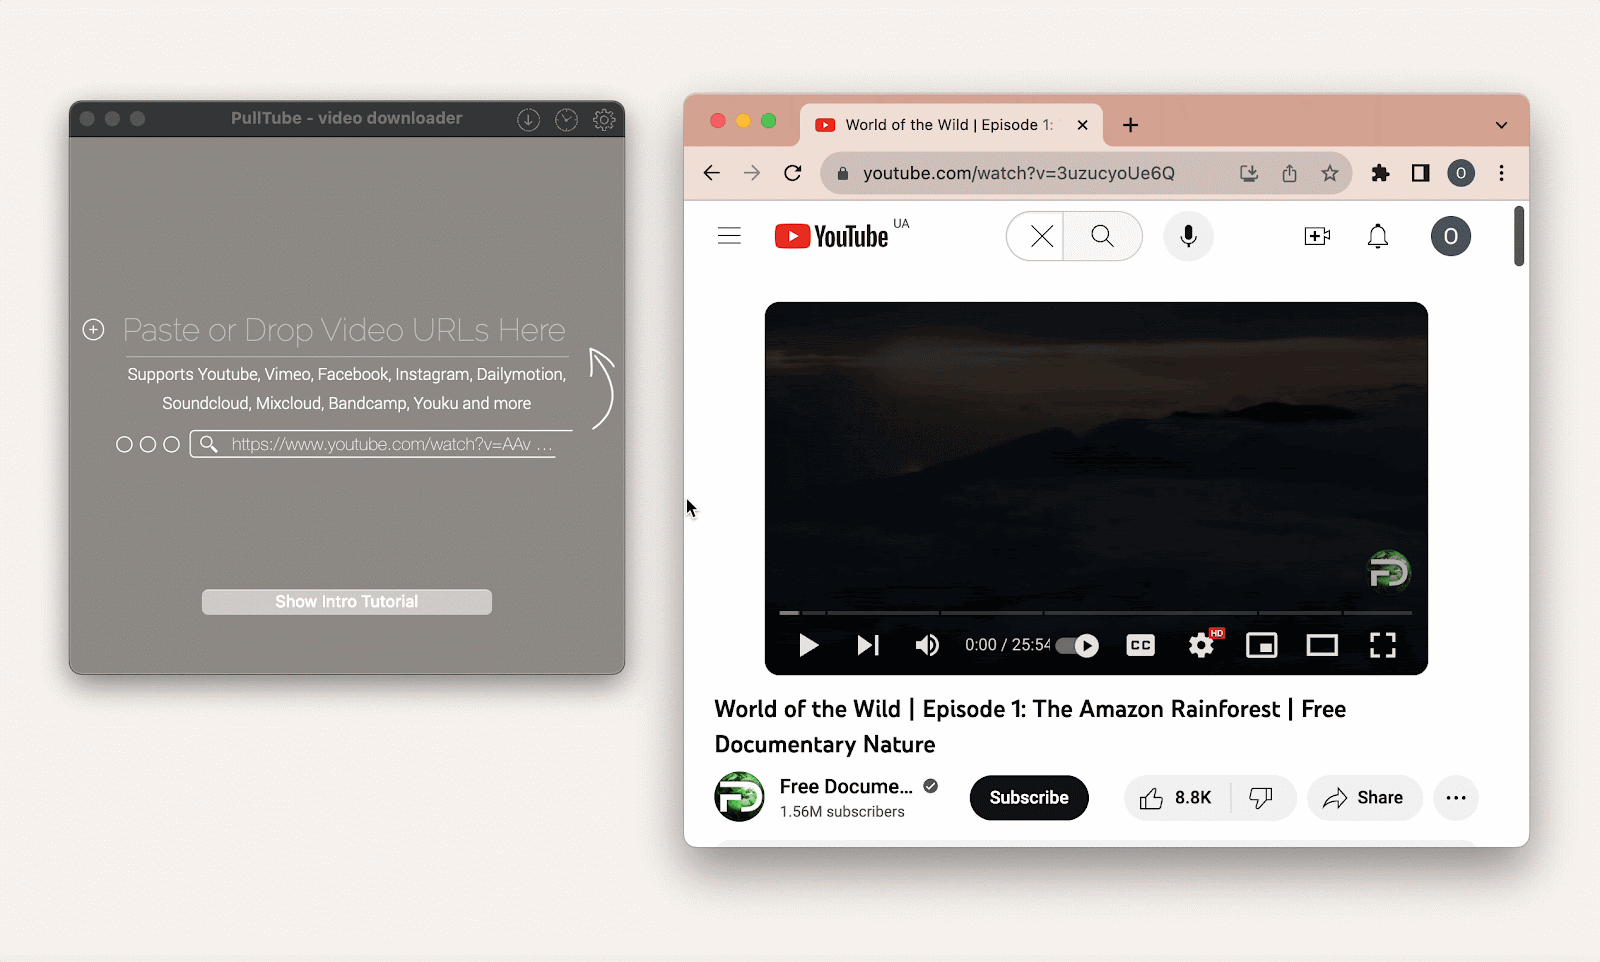 pulltube mac app to download videos from youtube